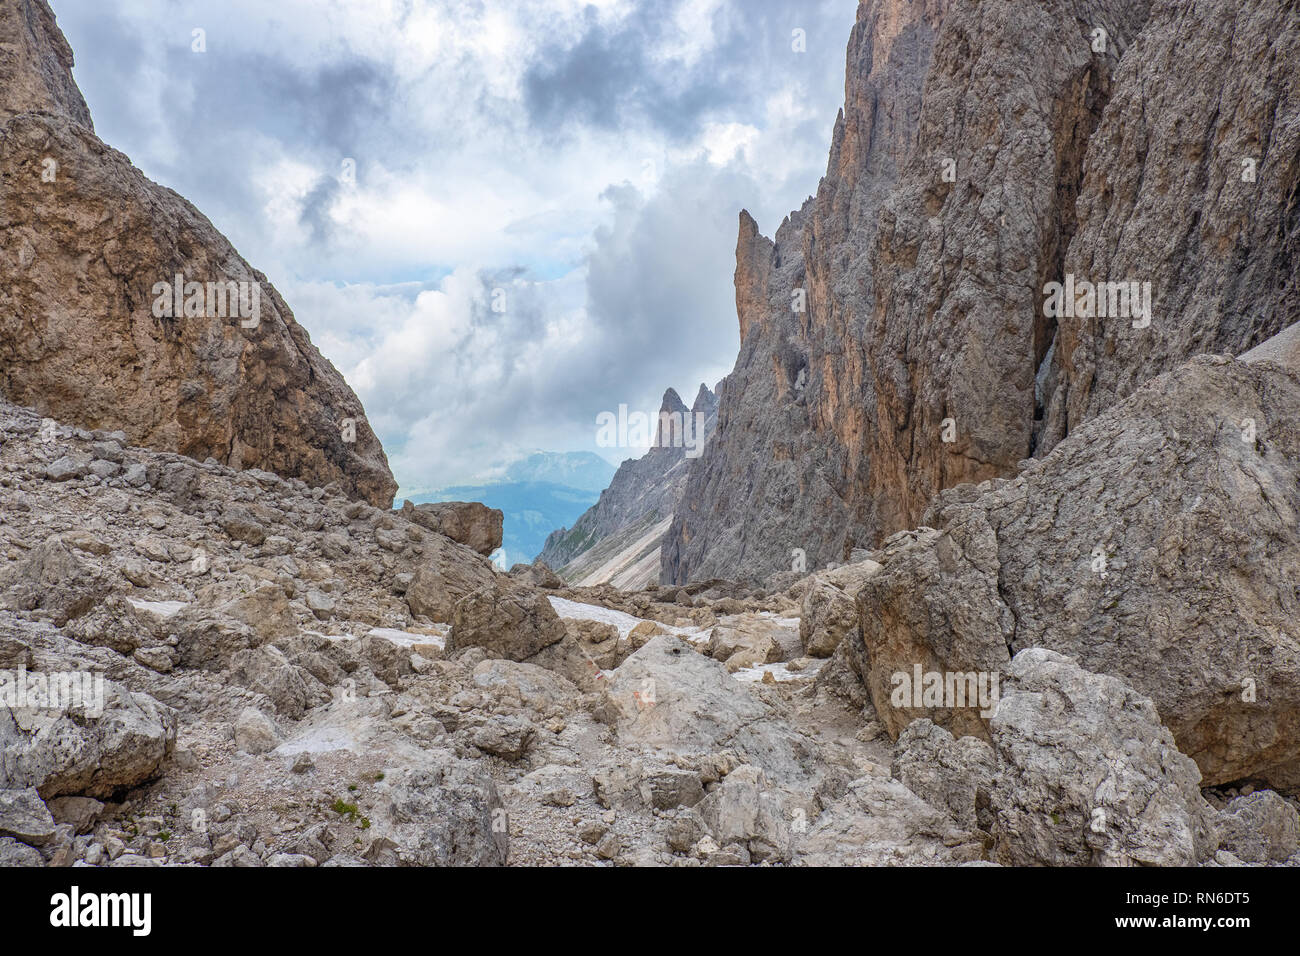 Mountain ravine with cliffs in the alps Stock Photo